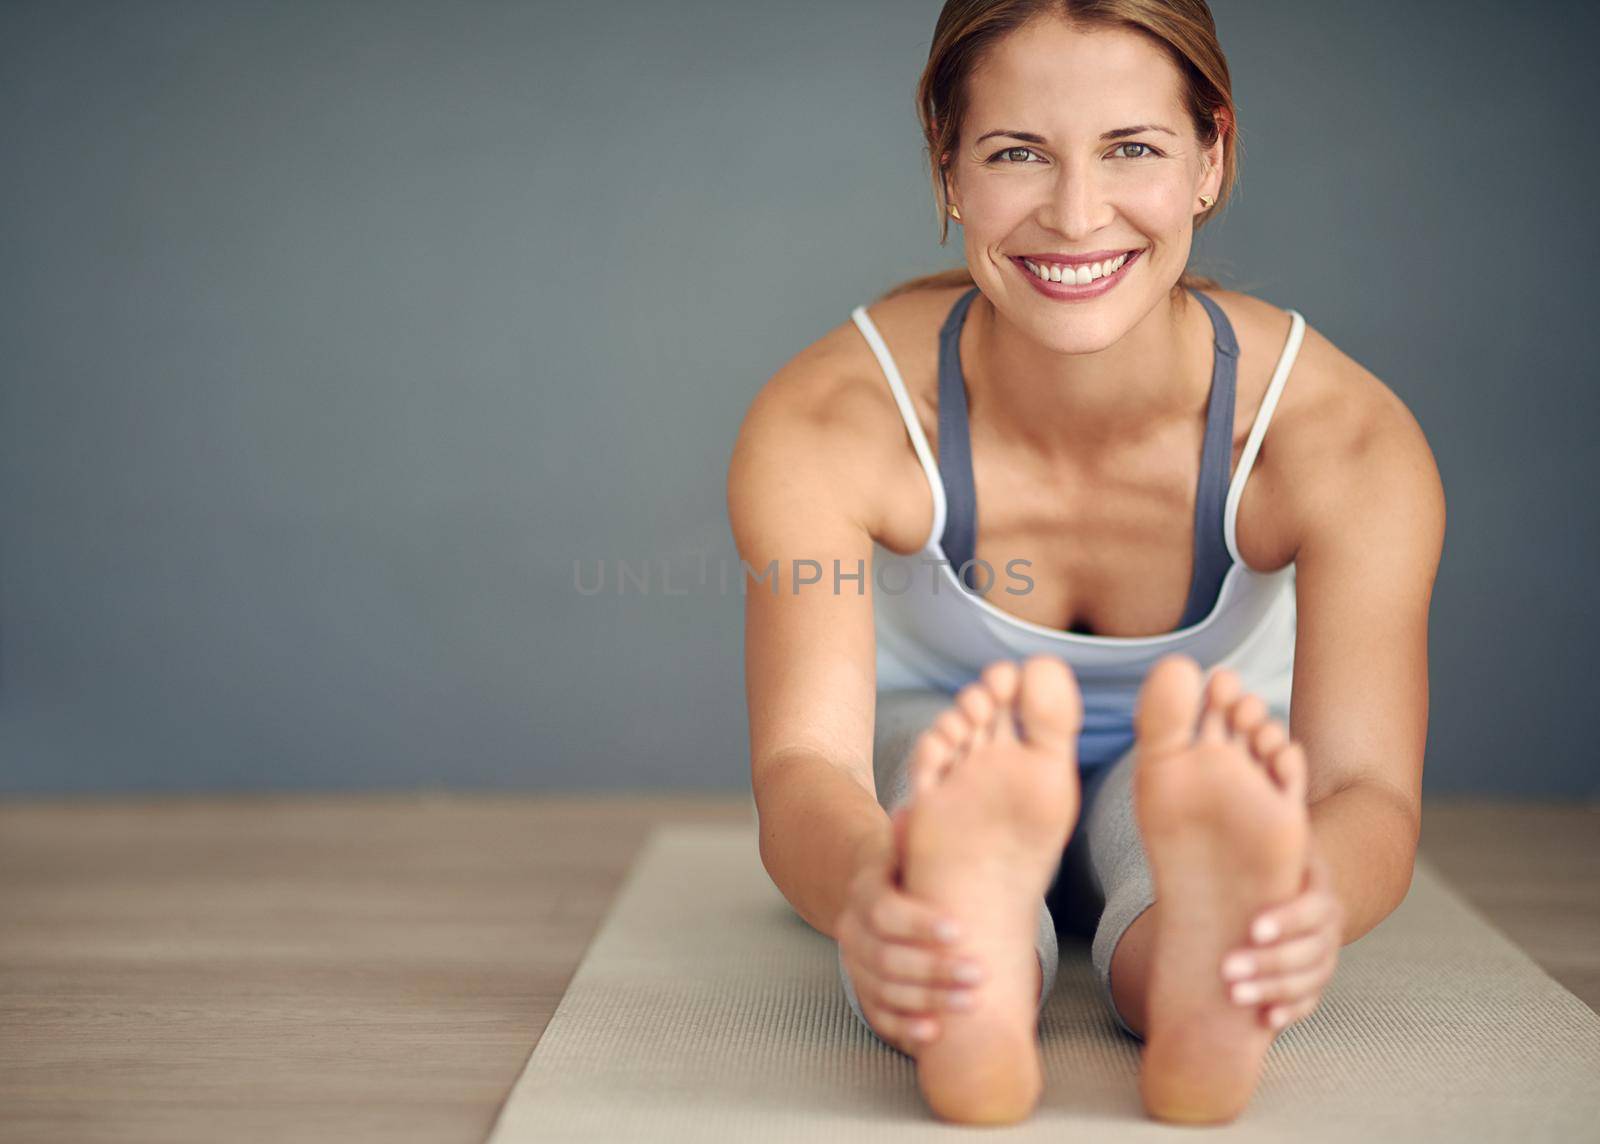 Smile, breathe and go slowly. Portrait of a young woman doing yoga. by YuriArcurs